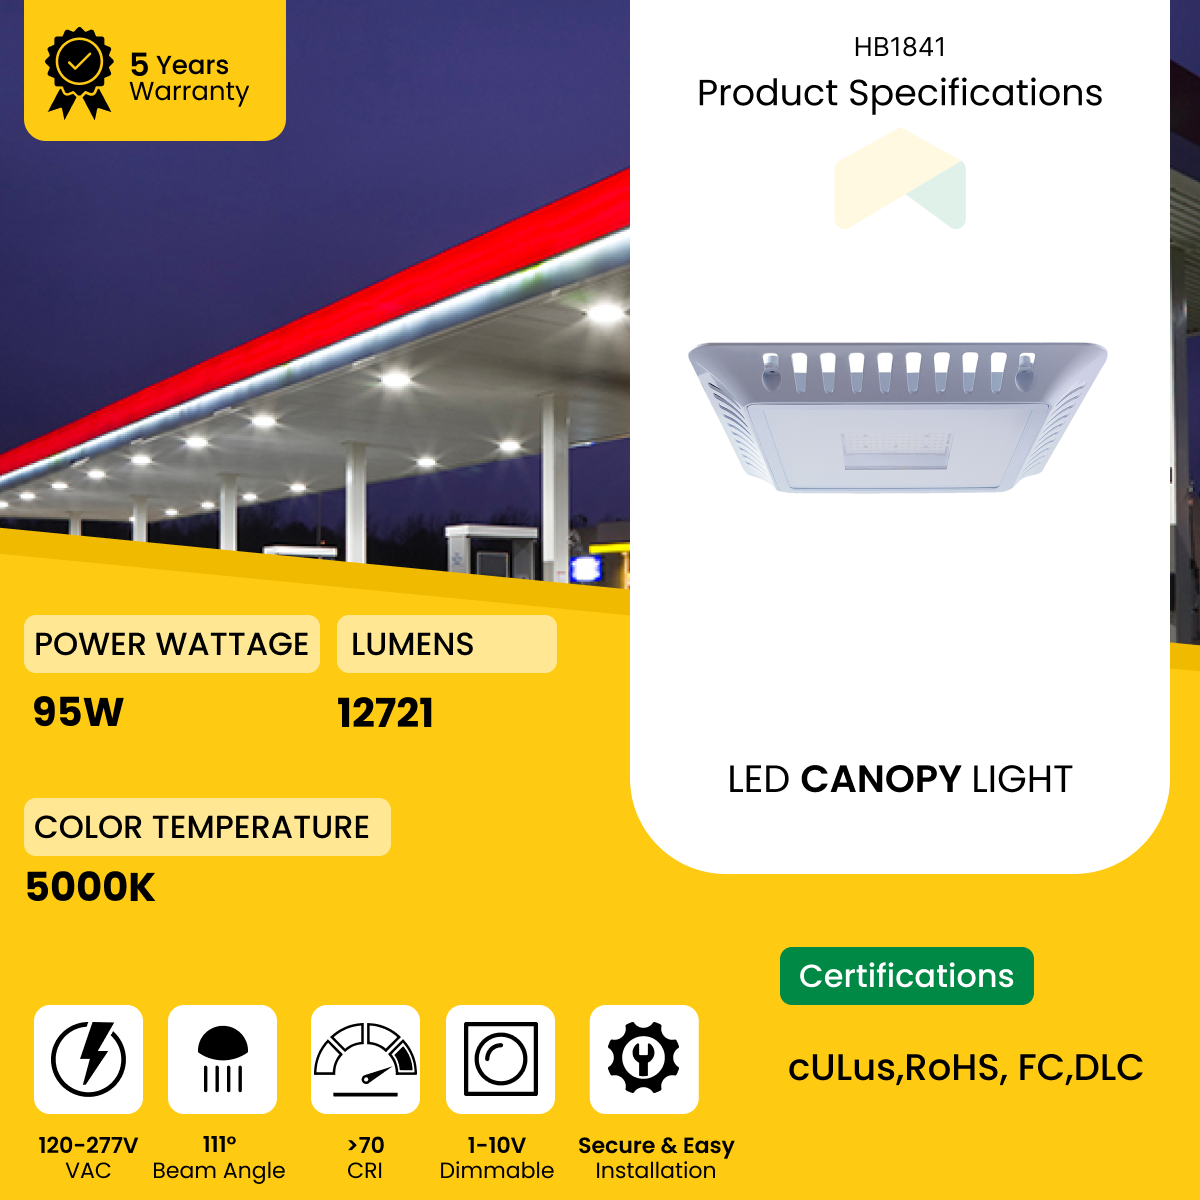 LED Gas Station Canopy Light - 95W, 5000K, 12721 Lumens, AC120-227V, 1-10V dimming IP66 - UL Listed - DLC Premium Listed - 5 Years Warranty